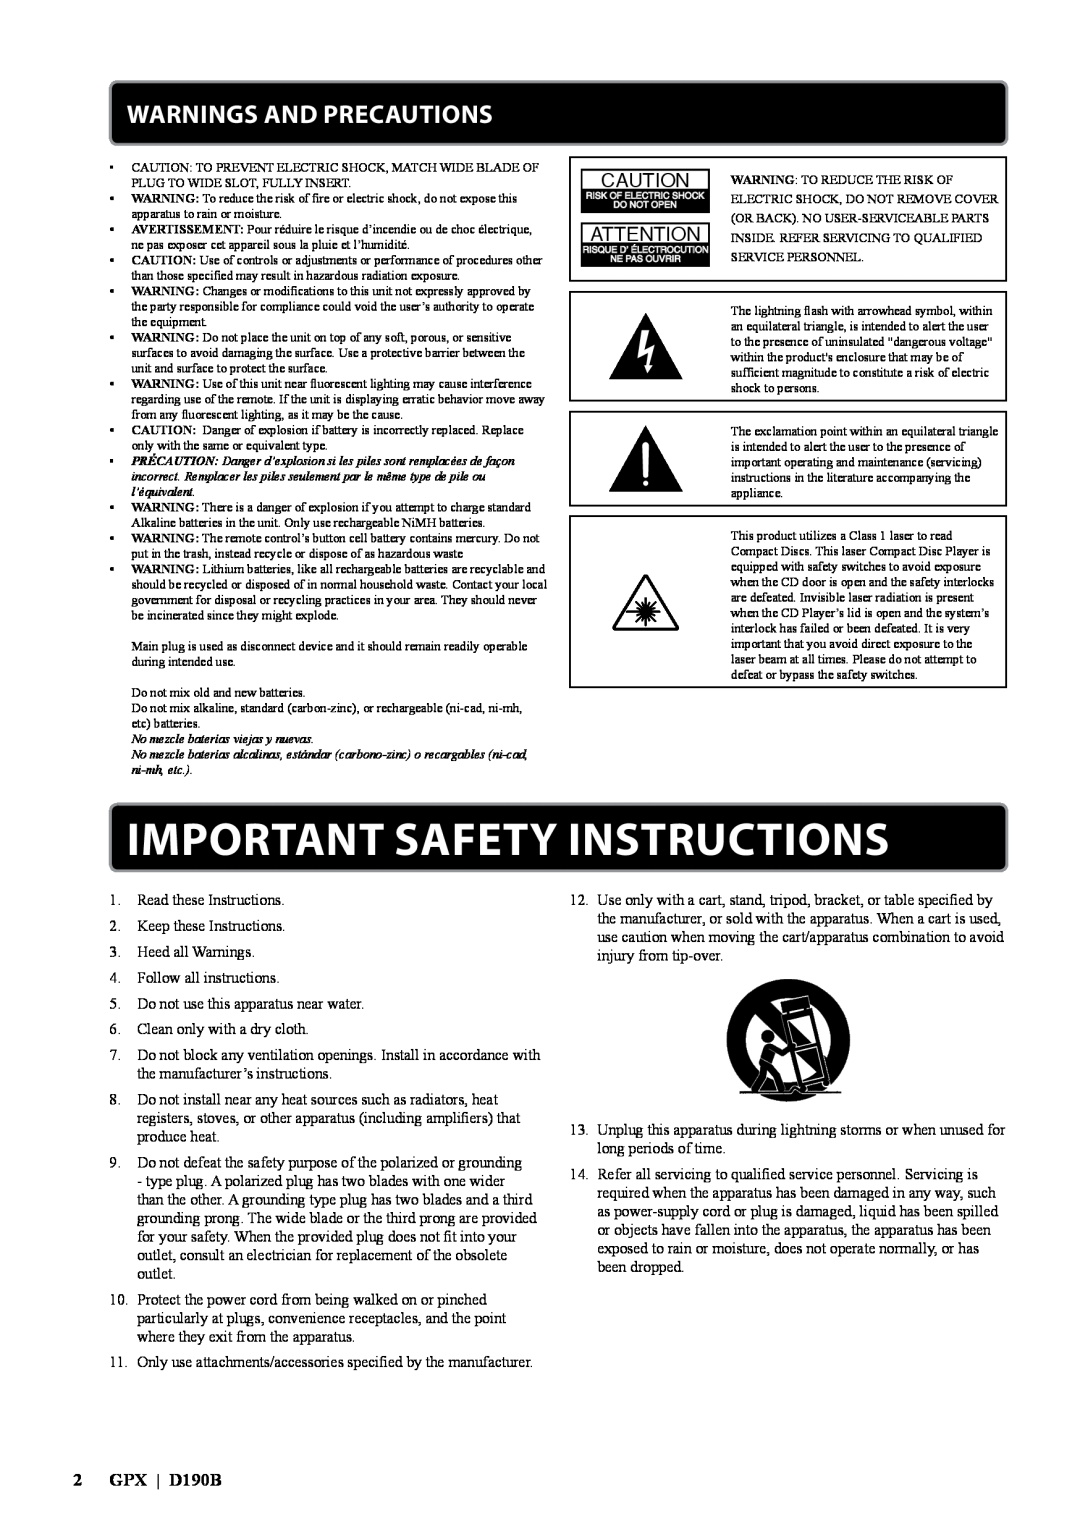 GPX manual Warnings and Precautions, Important Safety Instructions, GPX D190B 